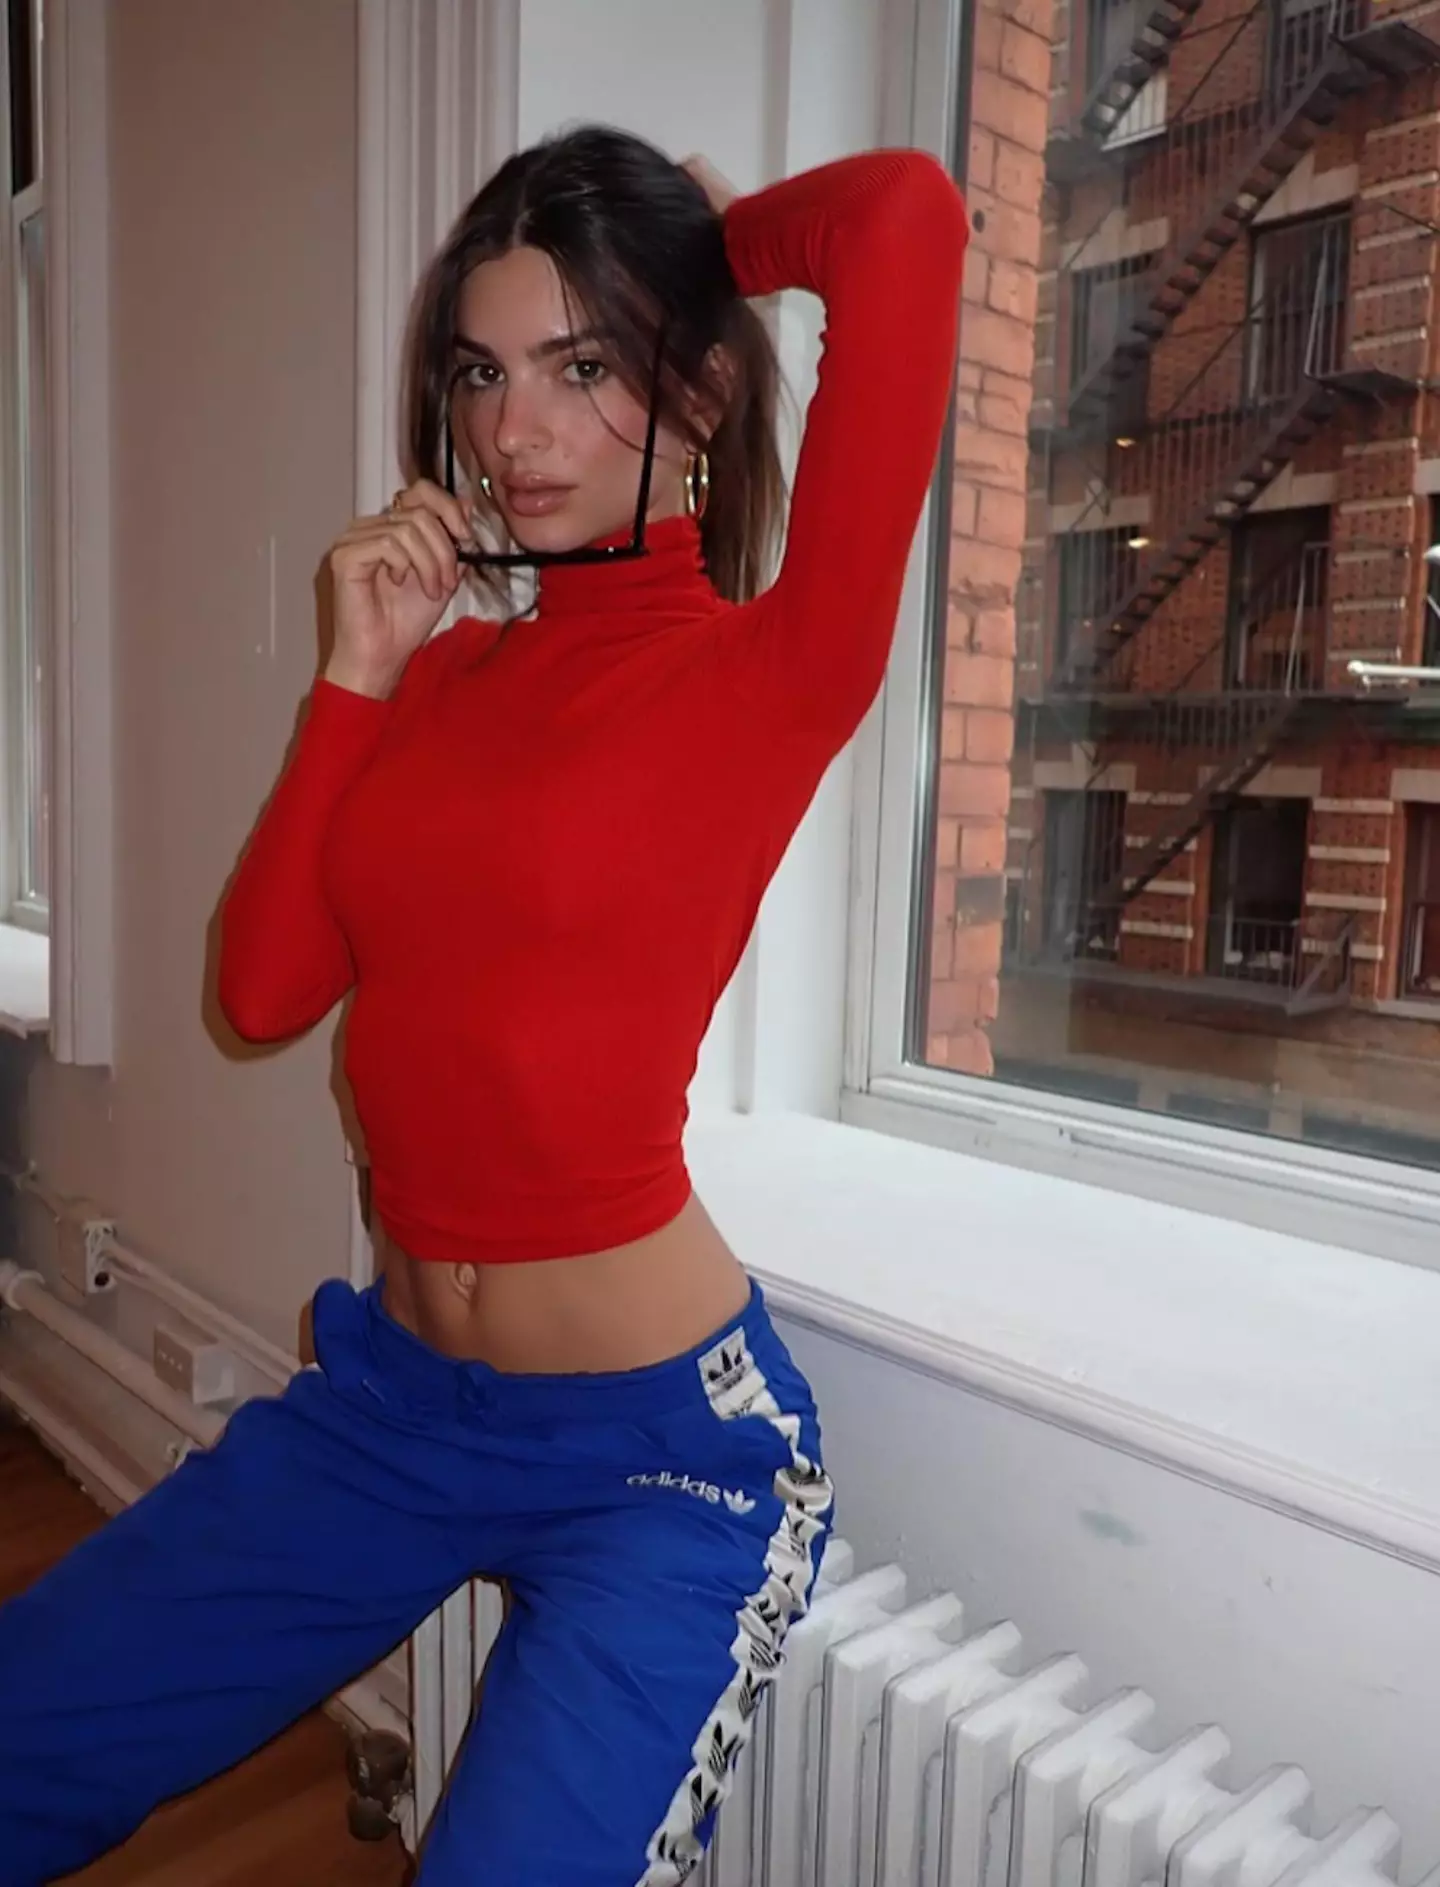 Emily Ratajkowski says she doesn't 'really believe in straight people' as 'sexuality is on a sliding scale'.